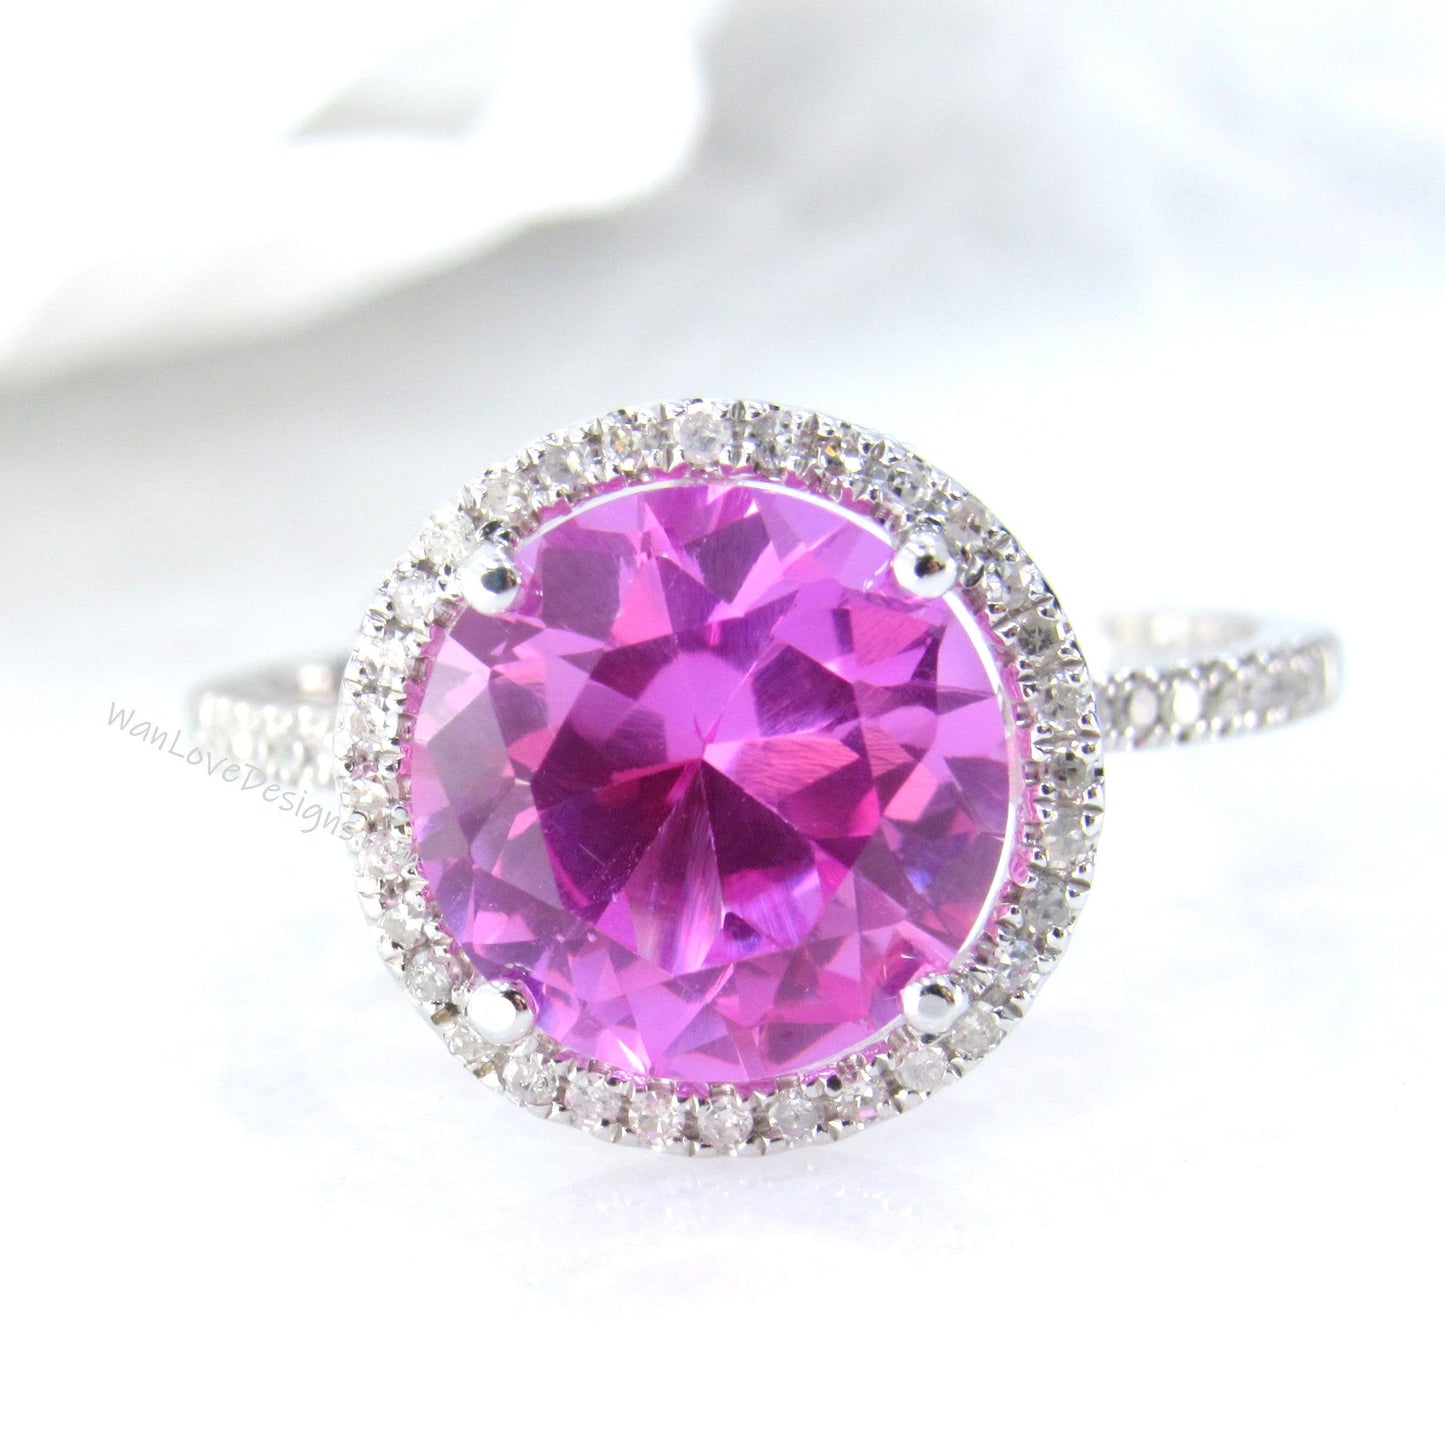 Pink Sapphire engagement ring unique round cut Vintage diamond halo wedding classical Bridal promise Anniversary ring wedding ring, Ready Wan Love Designs